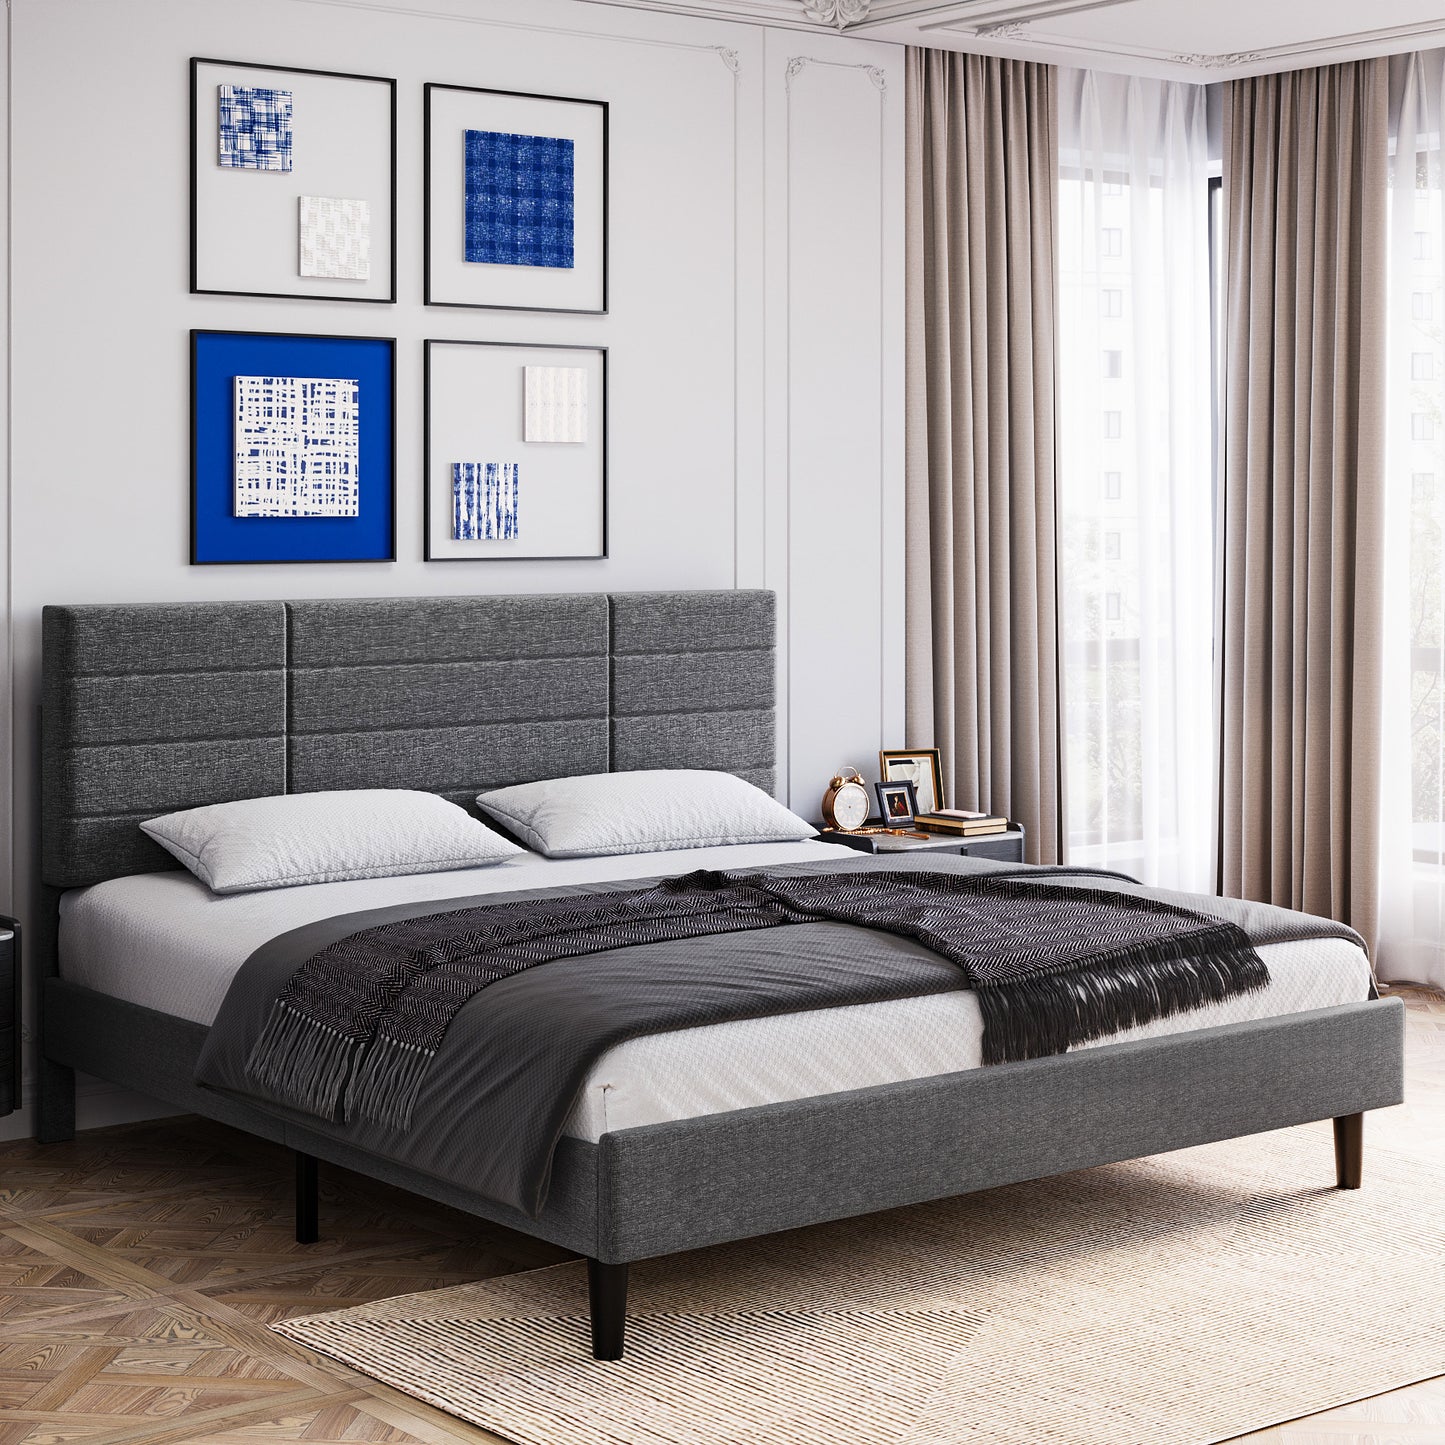 Molblly Full Size Platform Bed Frame with Upholstered Headboard, Strong Frame, and Wooden Slats Support, Non-Slip and Noise-Free, No Box Spring Needed, Easy Assembly, Dark Grey